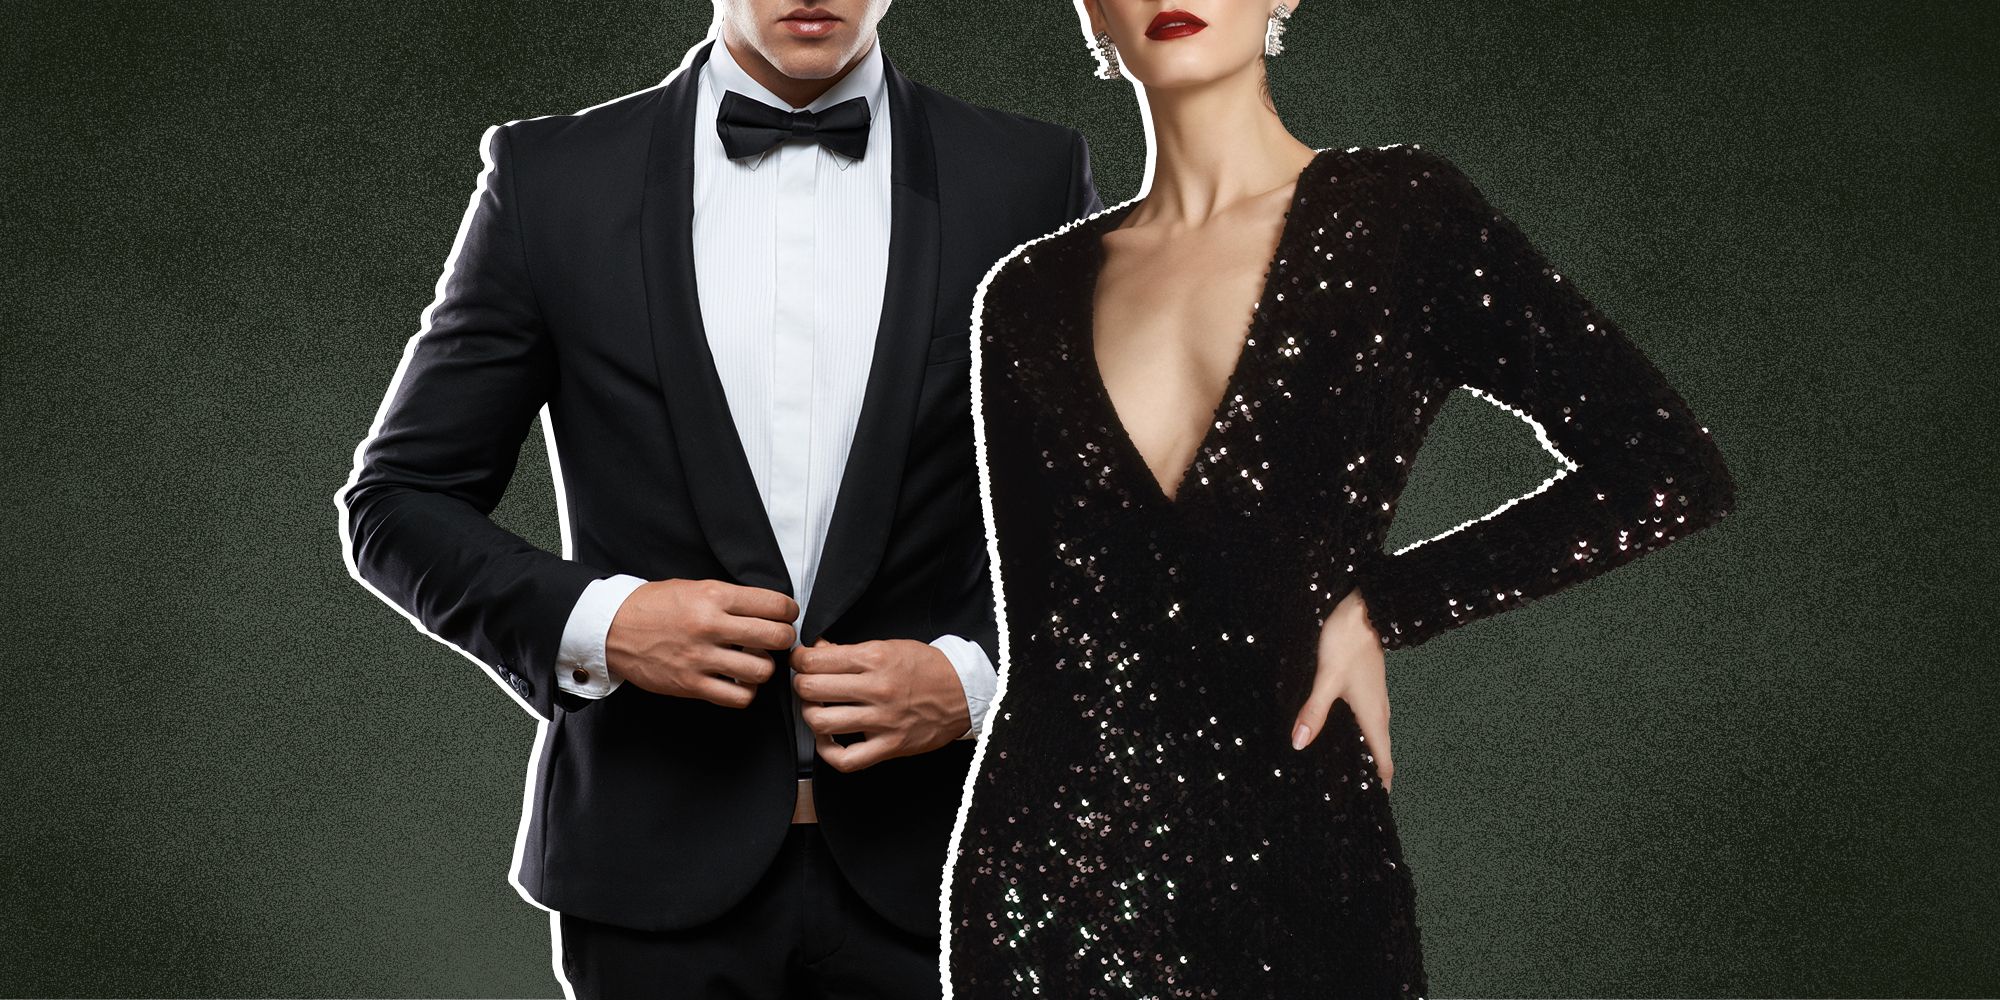 What Not To Wear To A Black Tie Event - All Tips & Advice